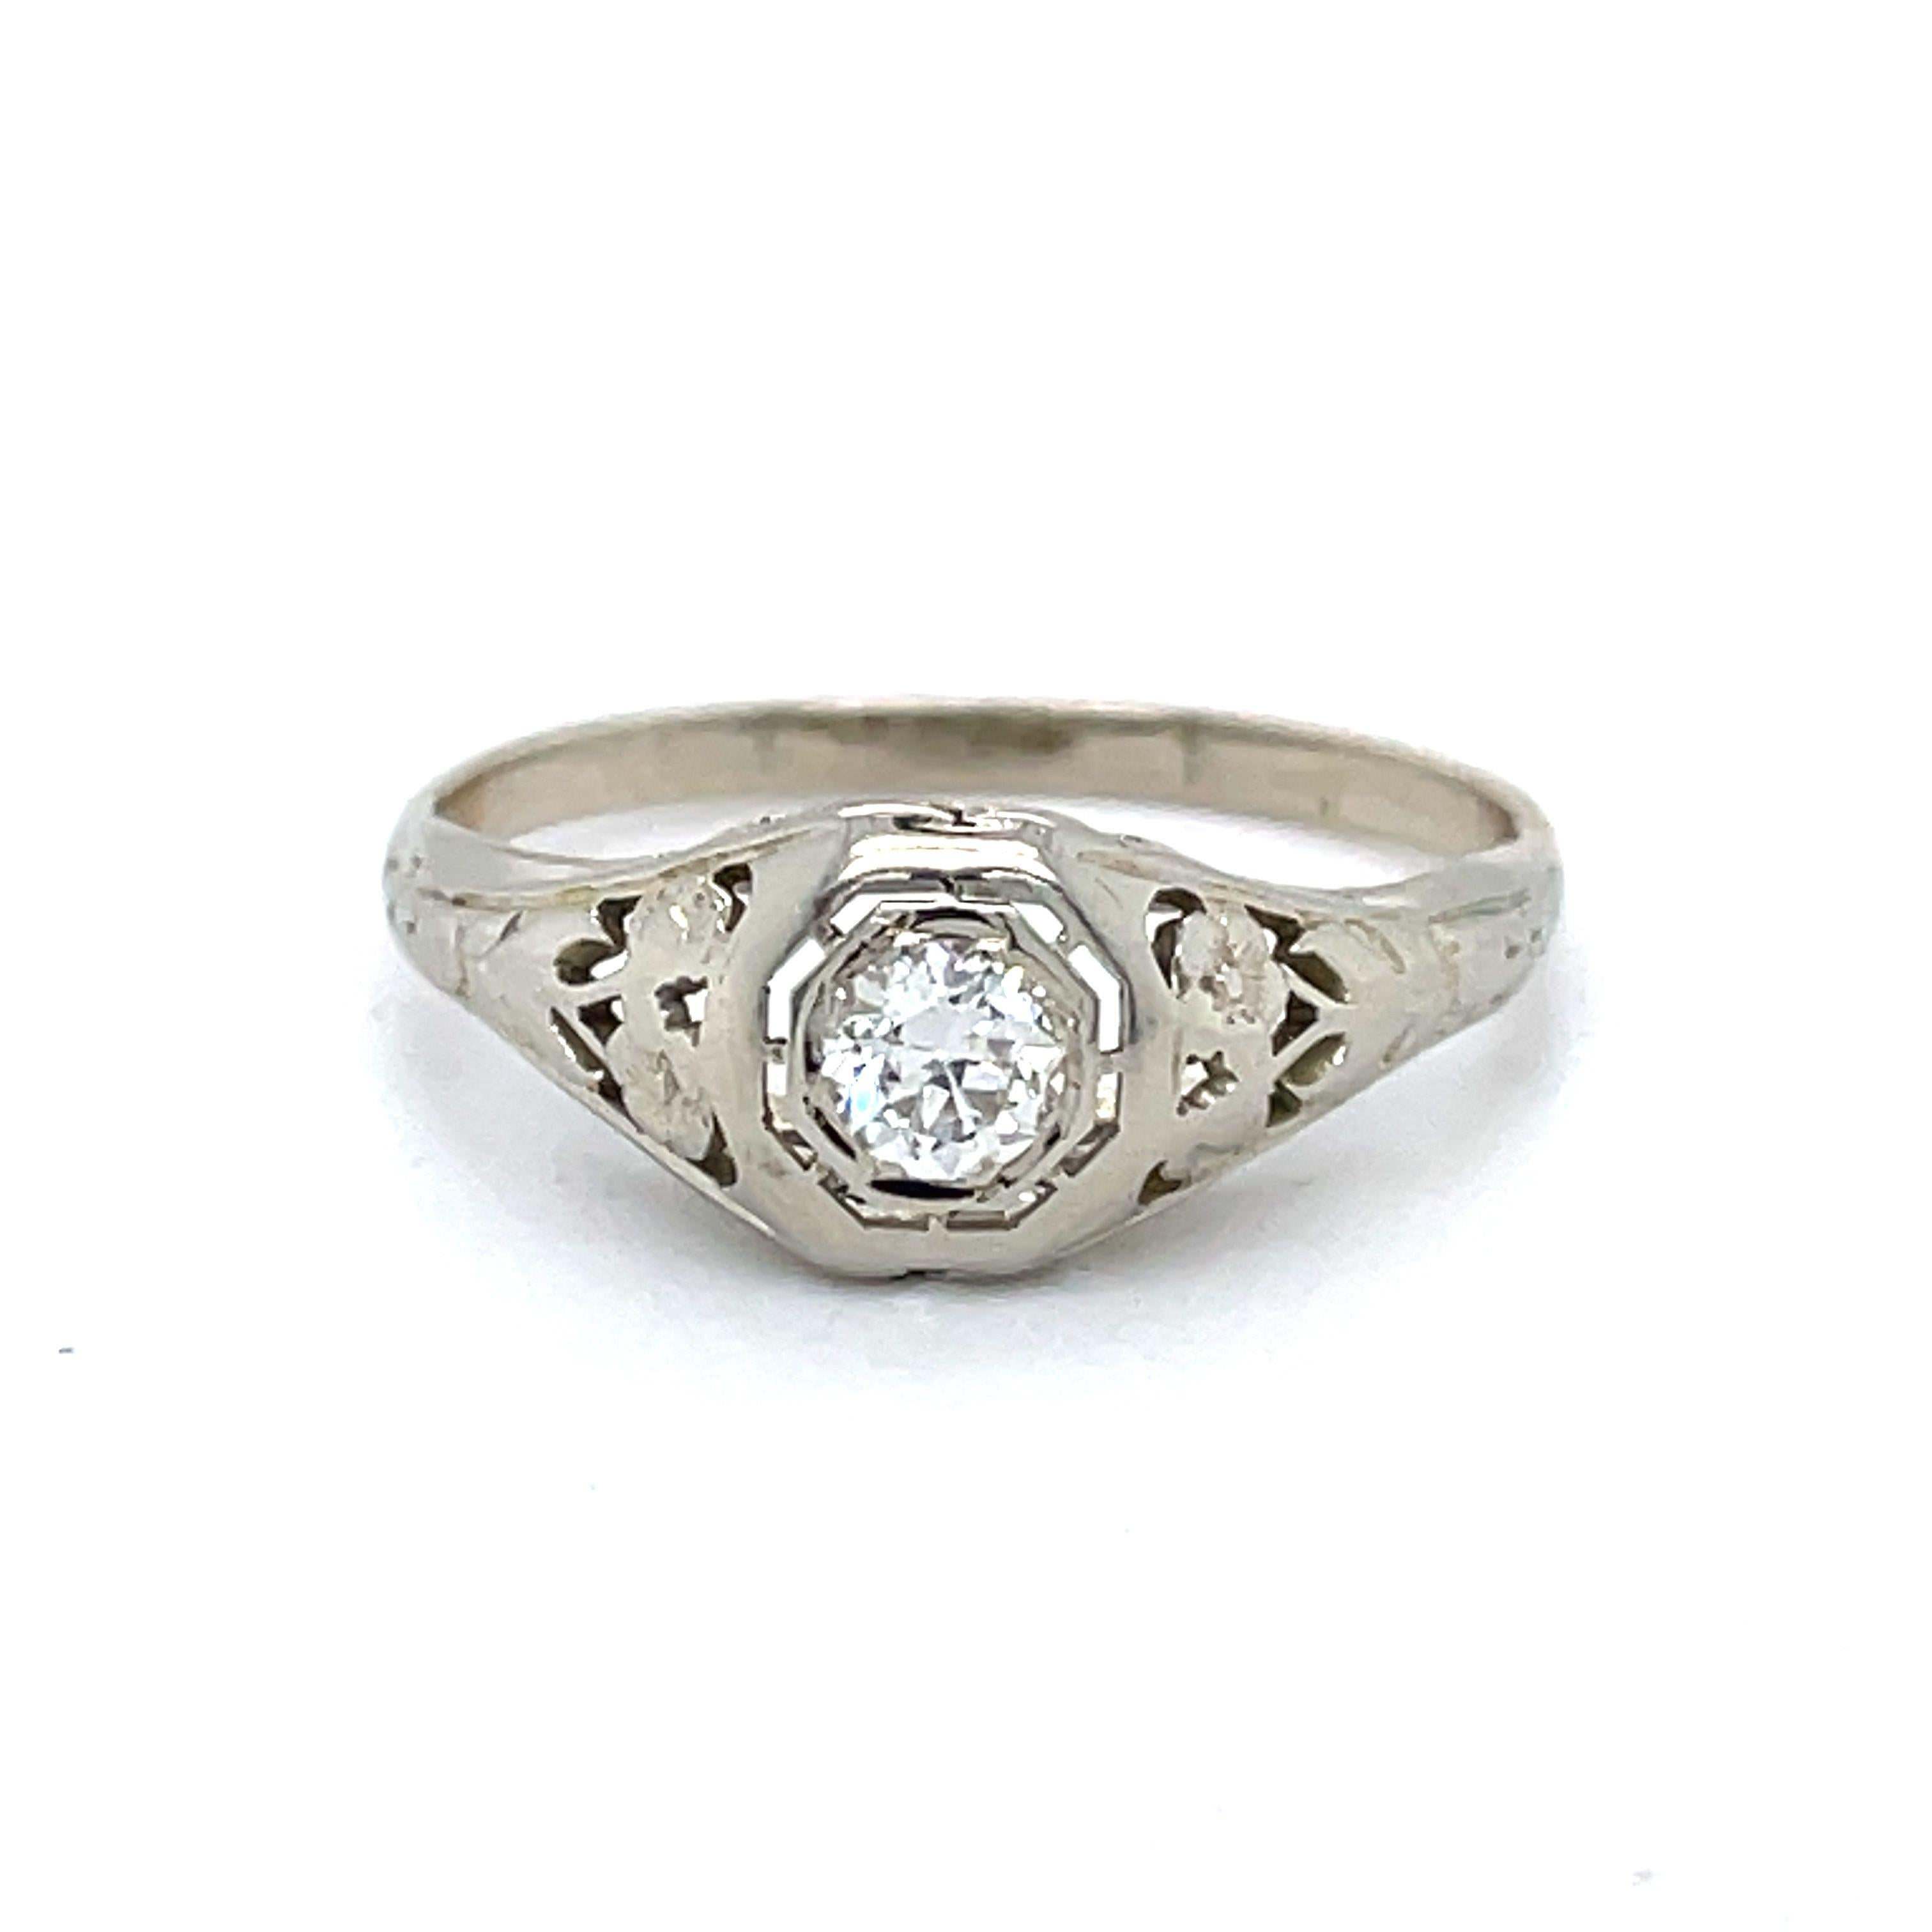 Dome Filigree Ring - 18K White gold dome ring, 0.15ct old European cut diamond For Sale 2